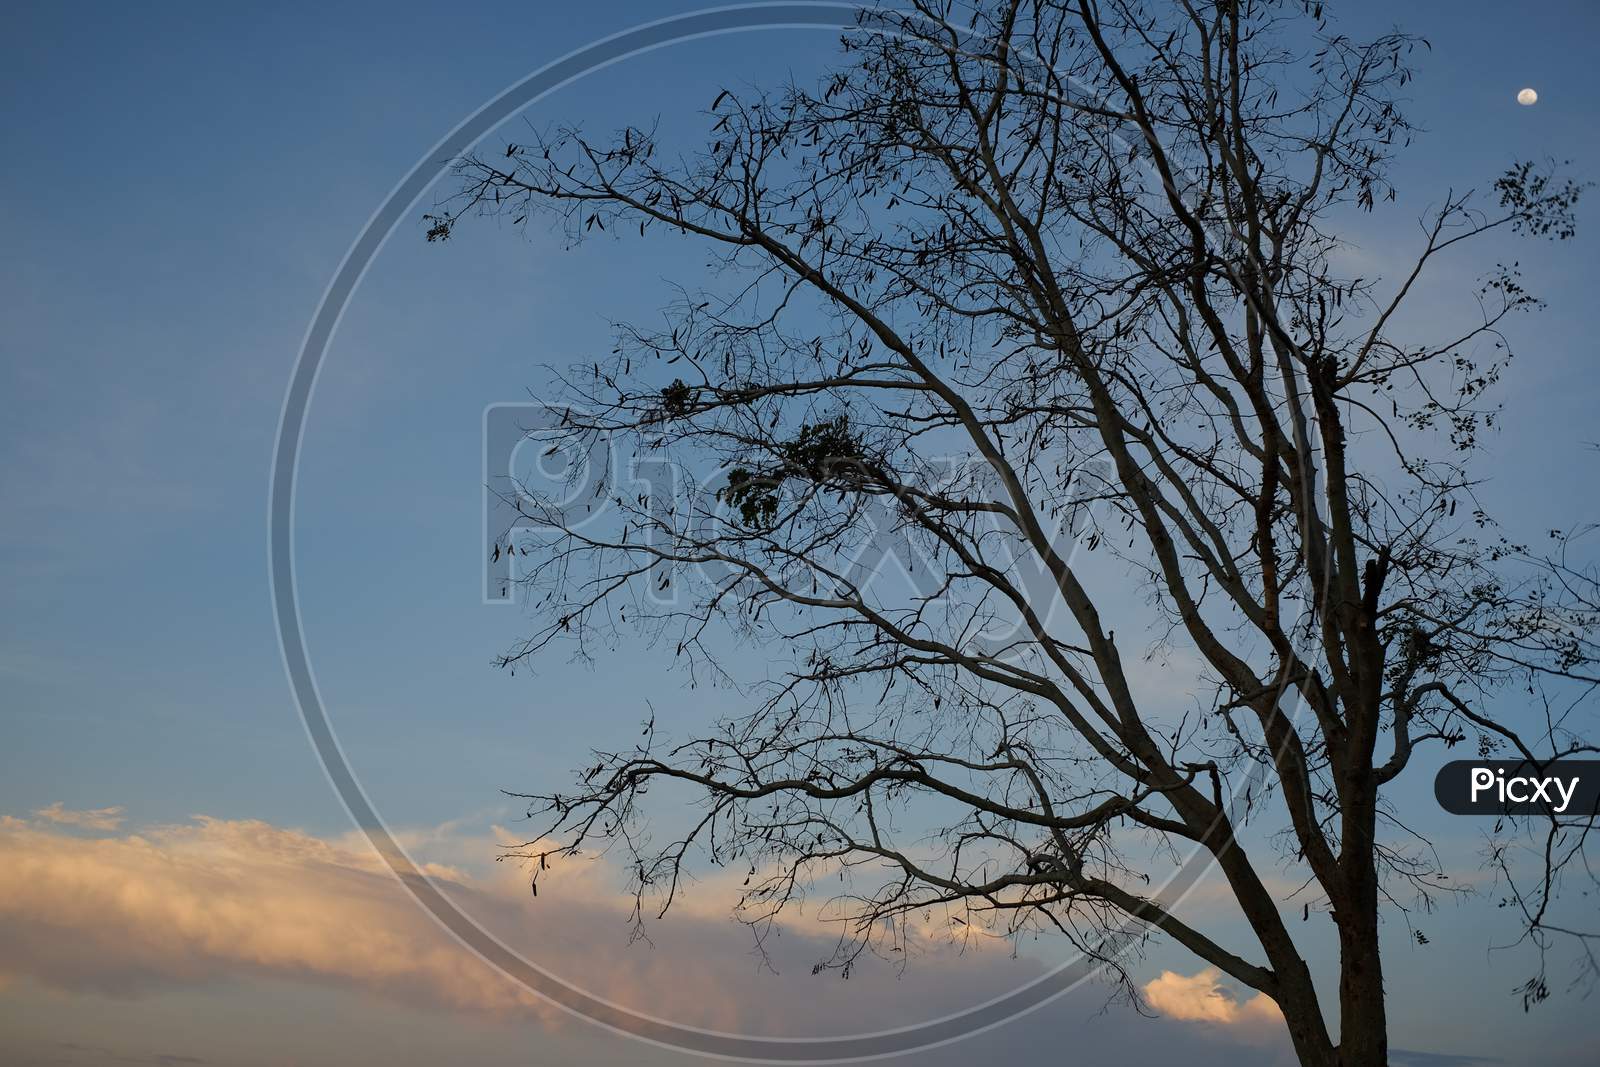 A dry autumn tree silhouette with a blue sky